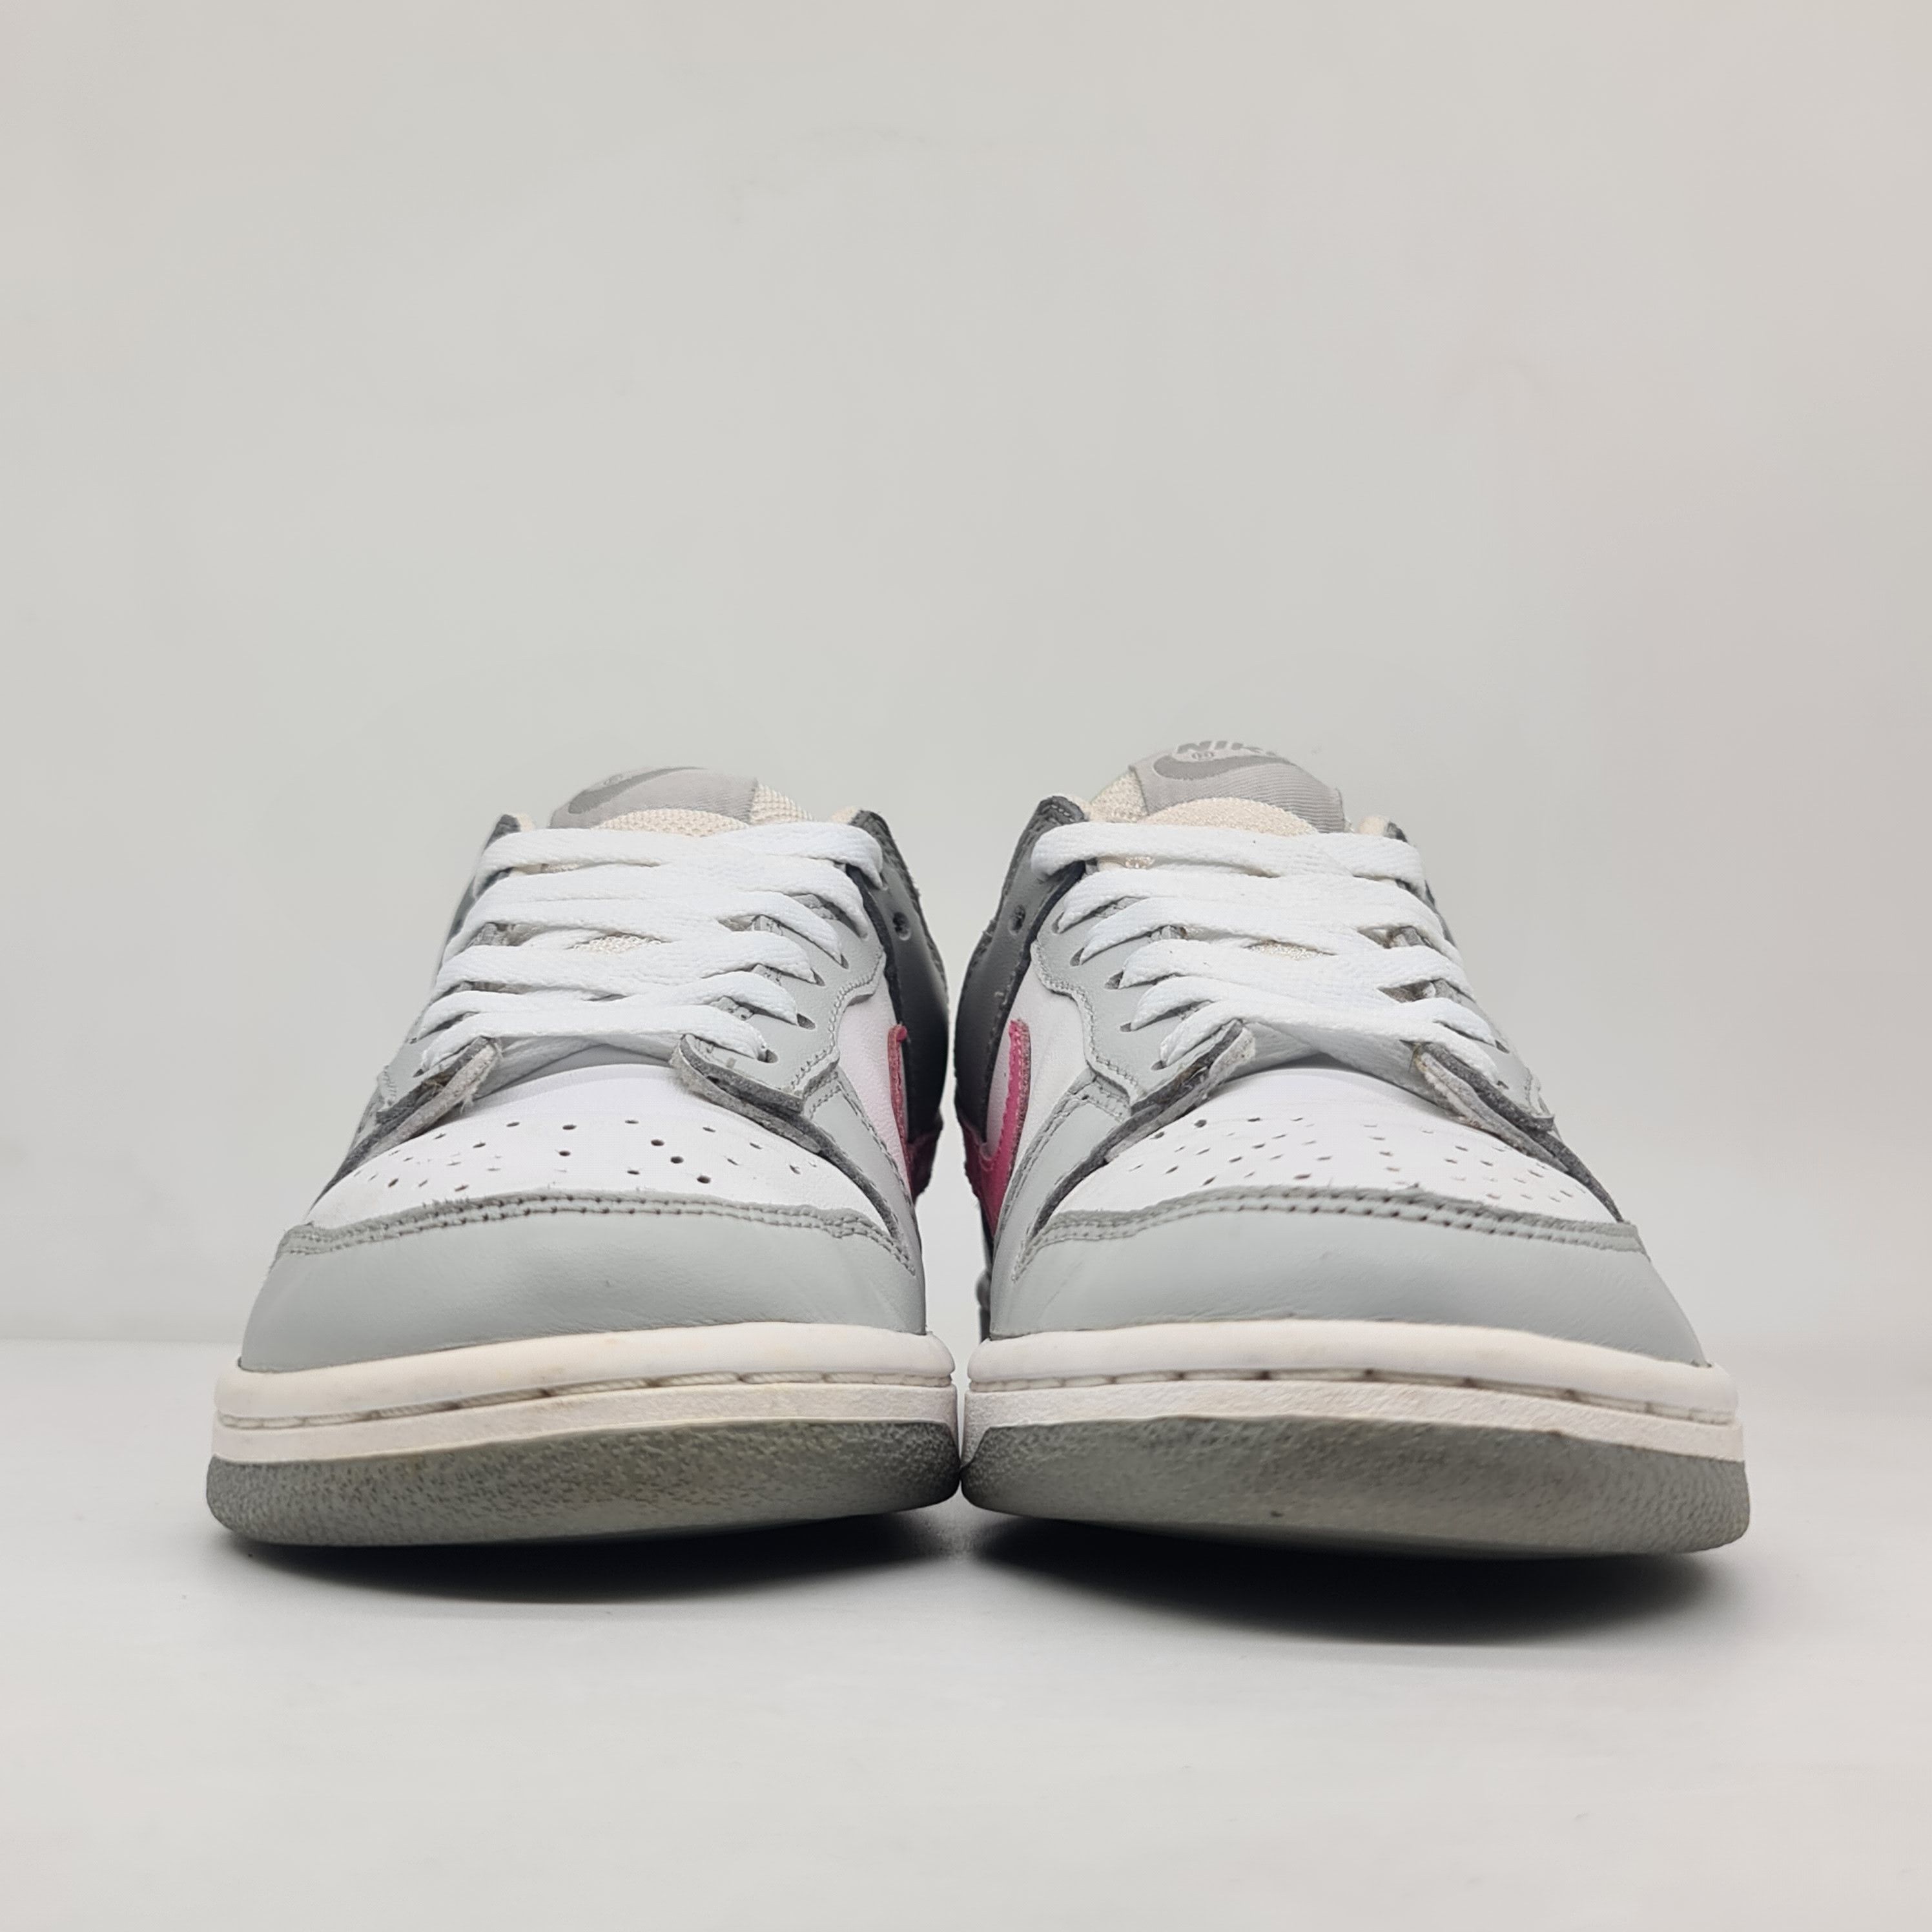 Nike - 2004 W's Dunk Low Pro Pink Neutral Gray - 2